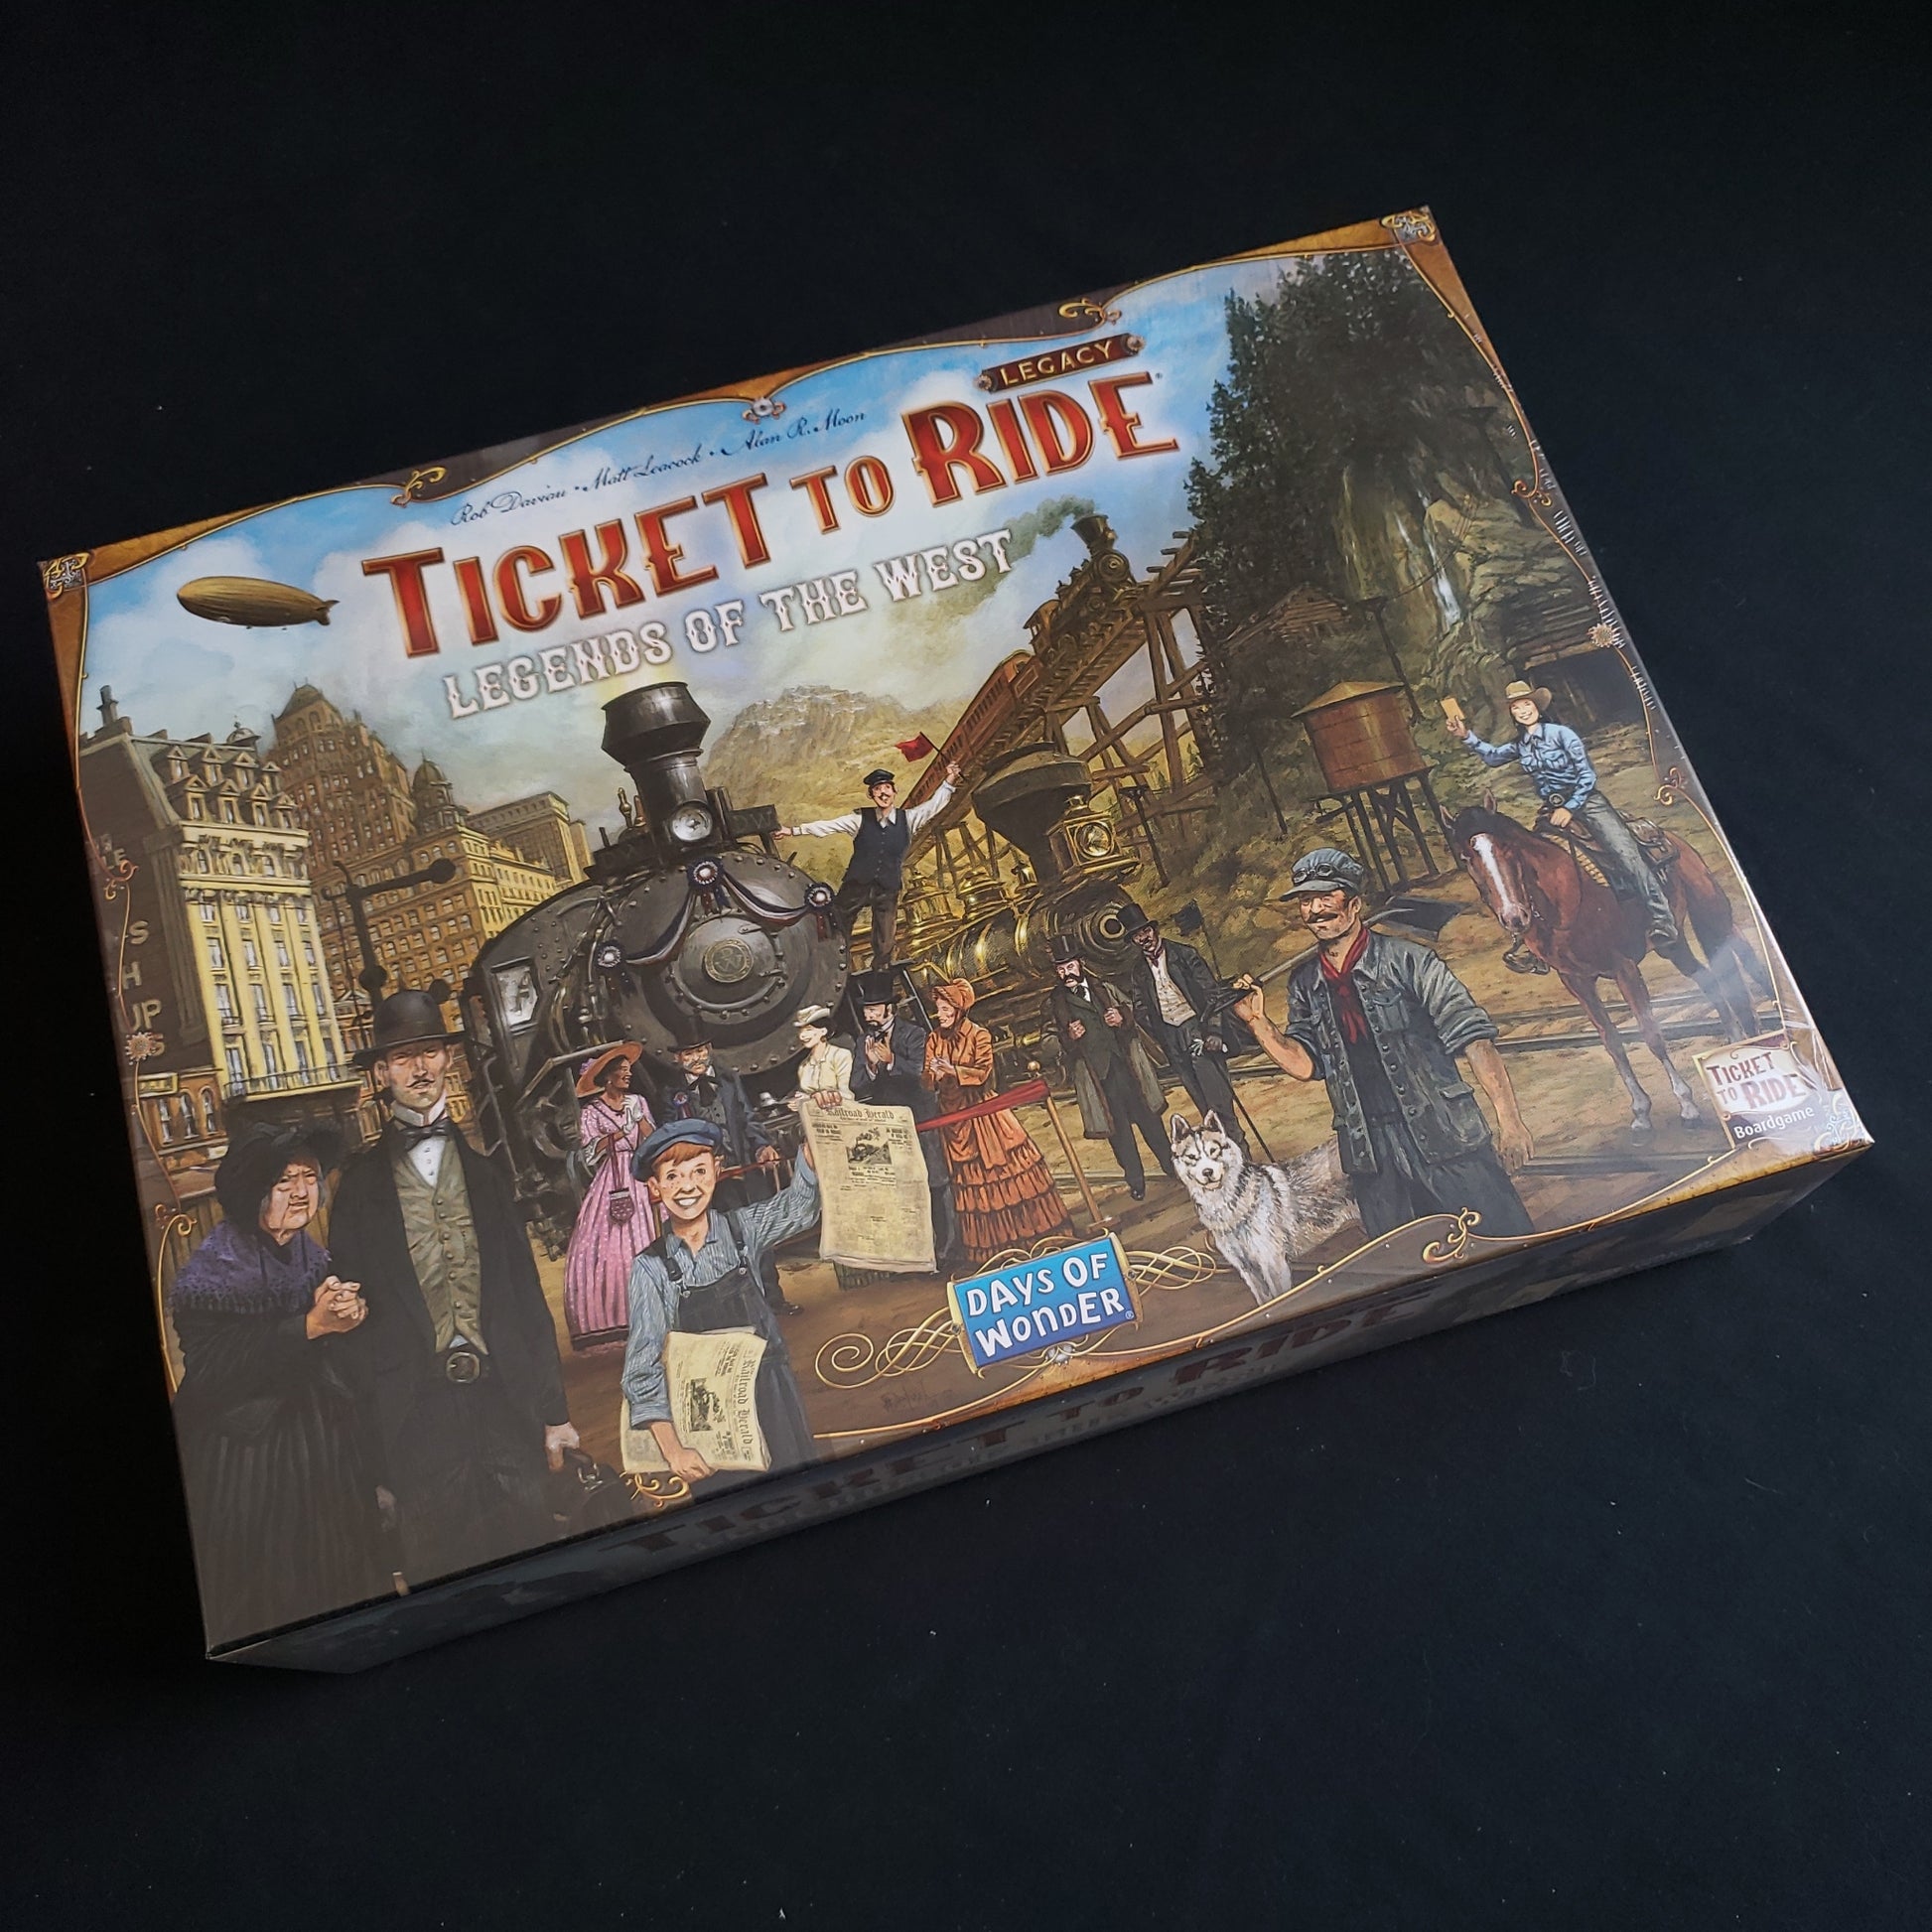 Image shows the front cover of the box of the Ticket to Ride Legacy: Legends of the West board game